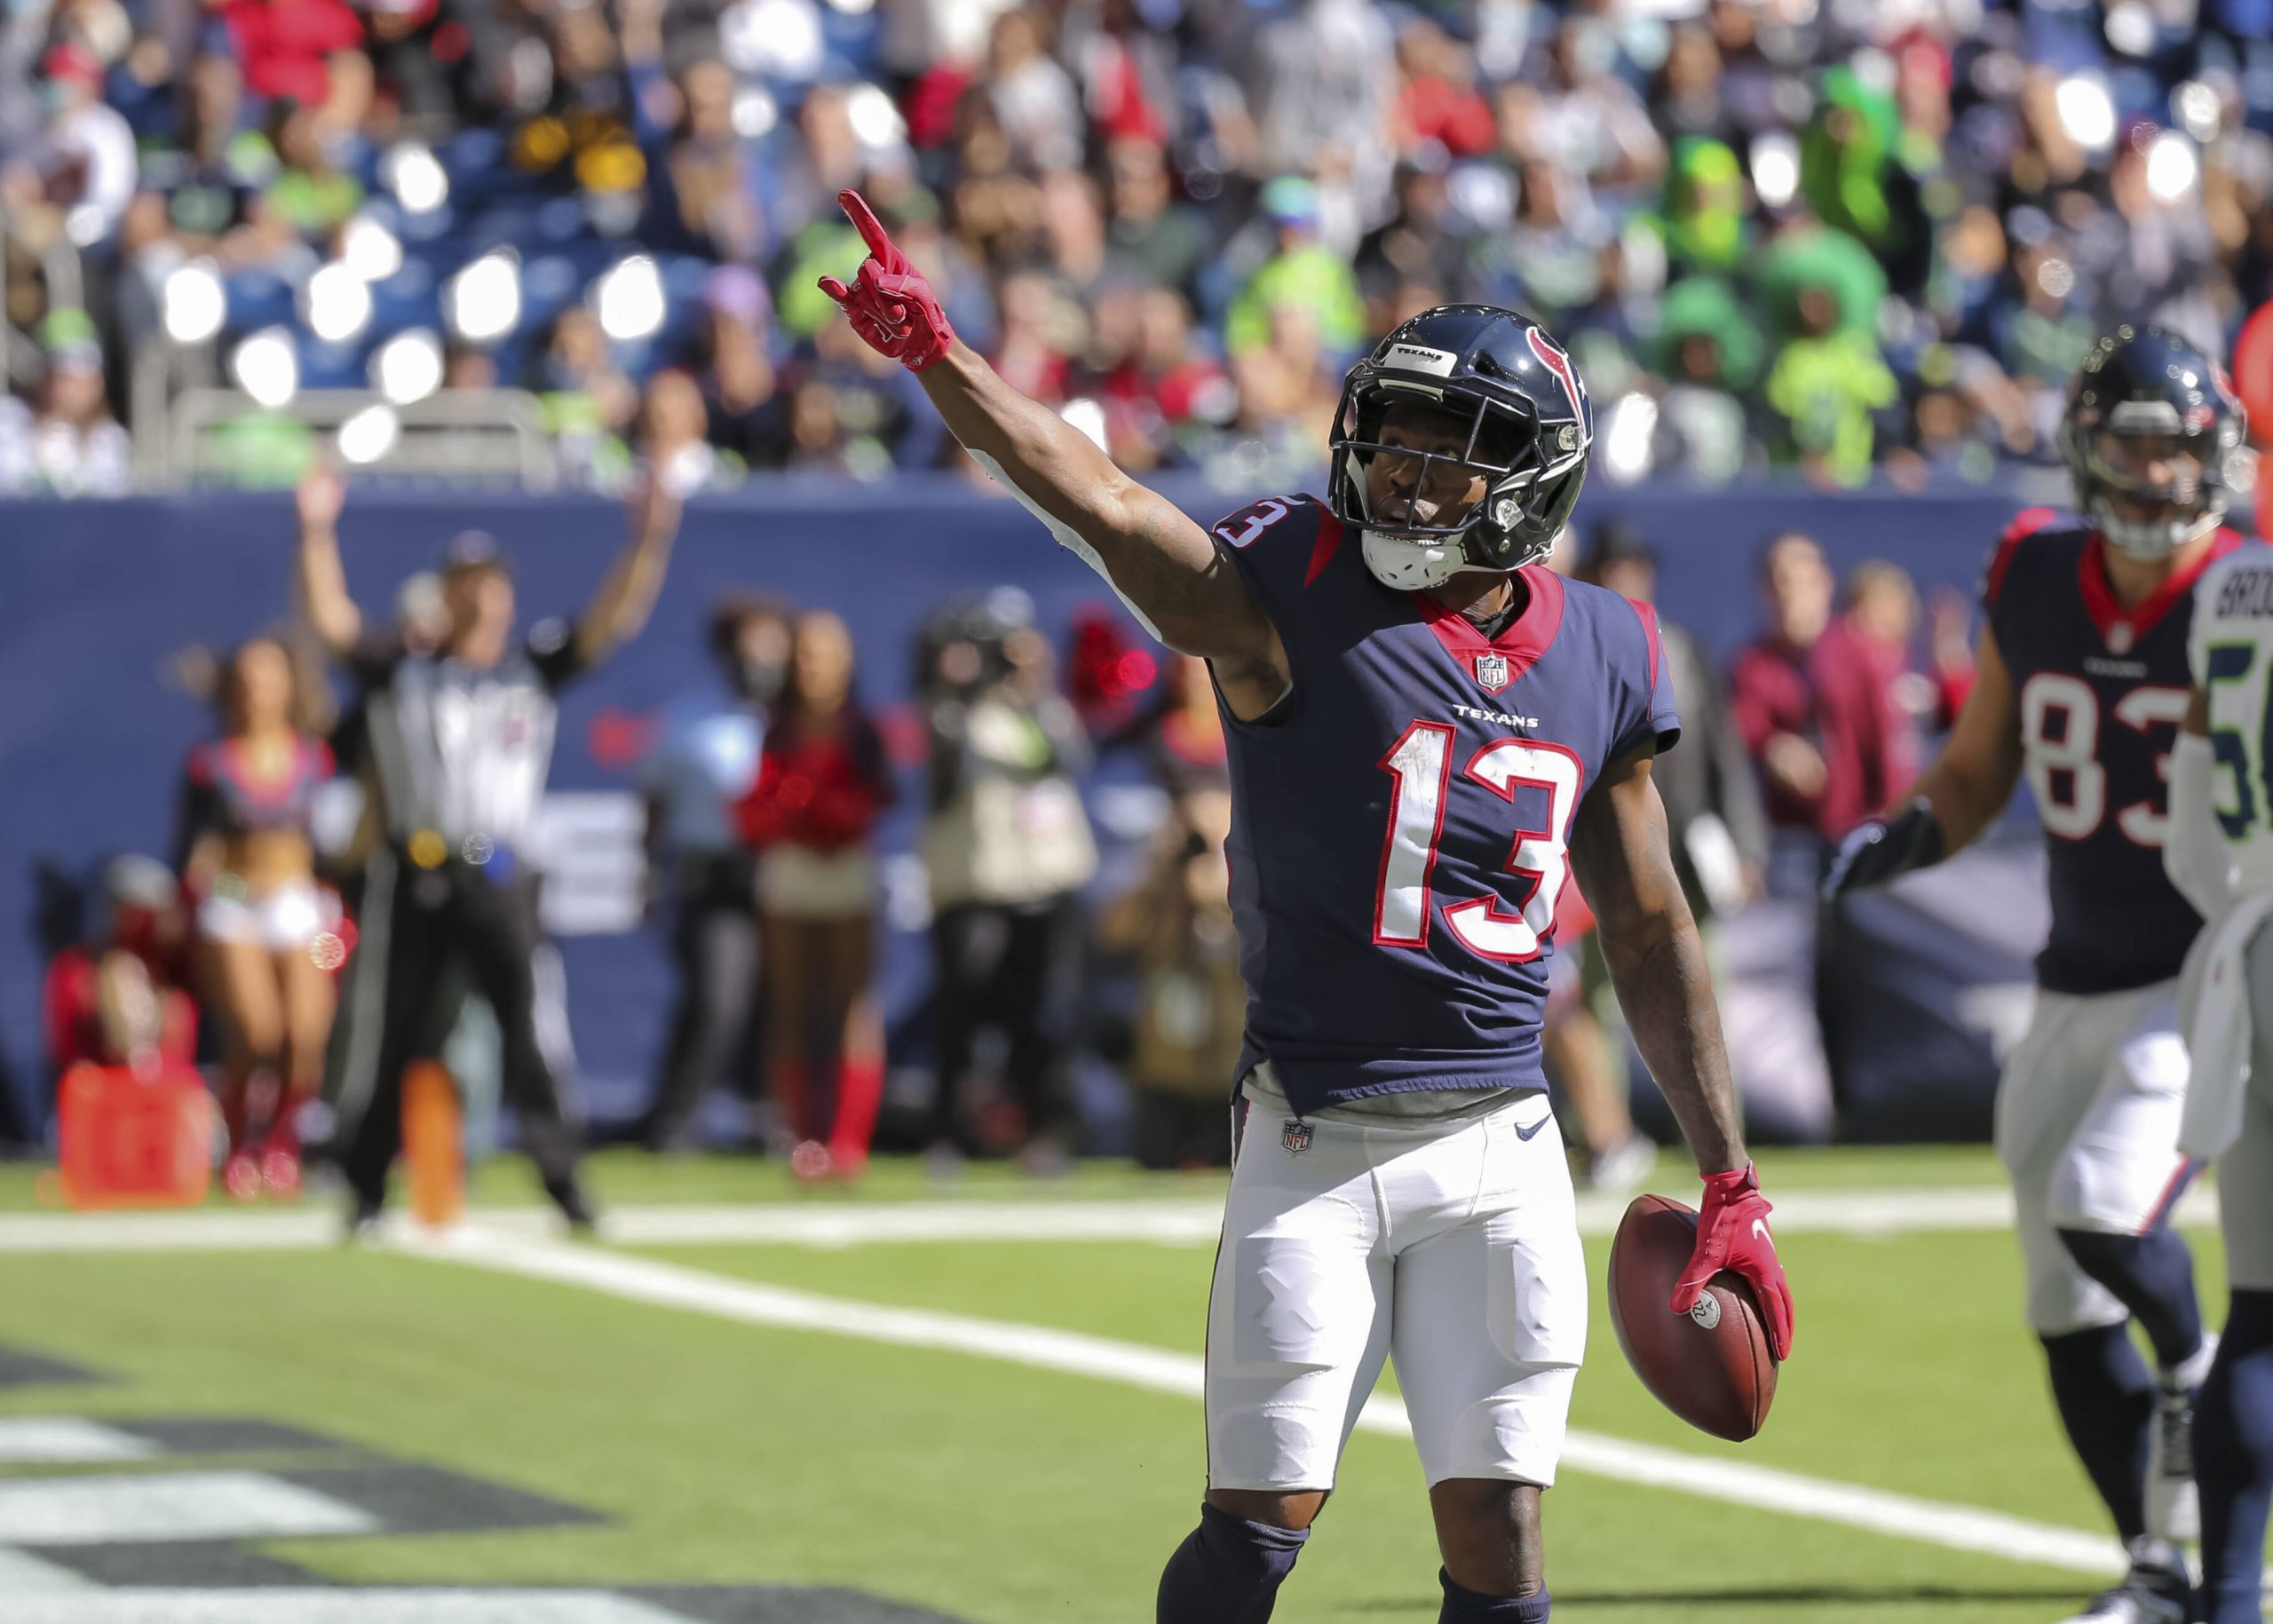 HOUSTON, TX - DECEMBER 12: Houston Texans wide receiver Brandin Cooks 13 celebrates his touchdown which was later recalled during the NFL, American Football Herren, USA football game between the Seattle Seahawks and Houston Texans on December 12, 2021 at NRG Stadium in Houston, Texas. Photo by Leslie Plaza Johnson/Icon Sportswire NFL: DEC 12 Seahawks at Texans Icon211212123